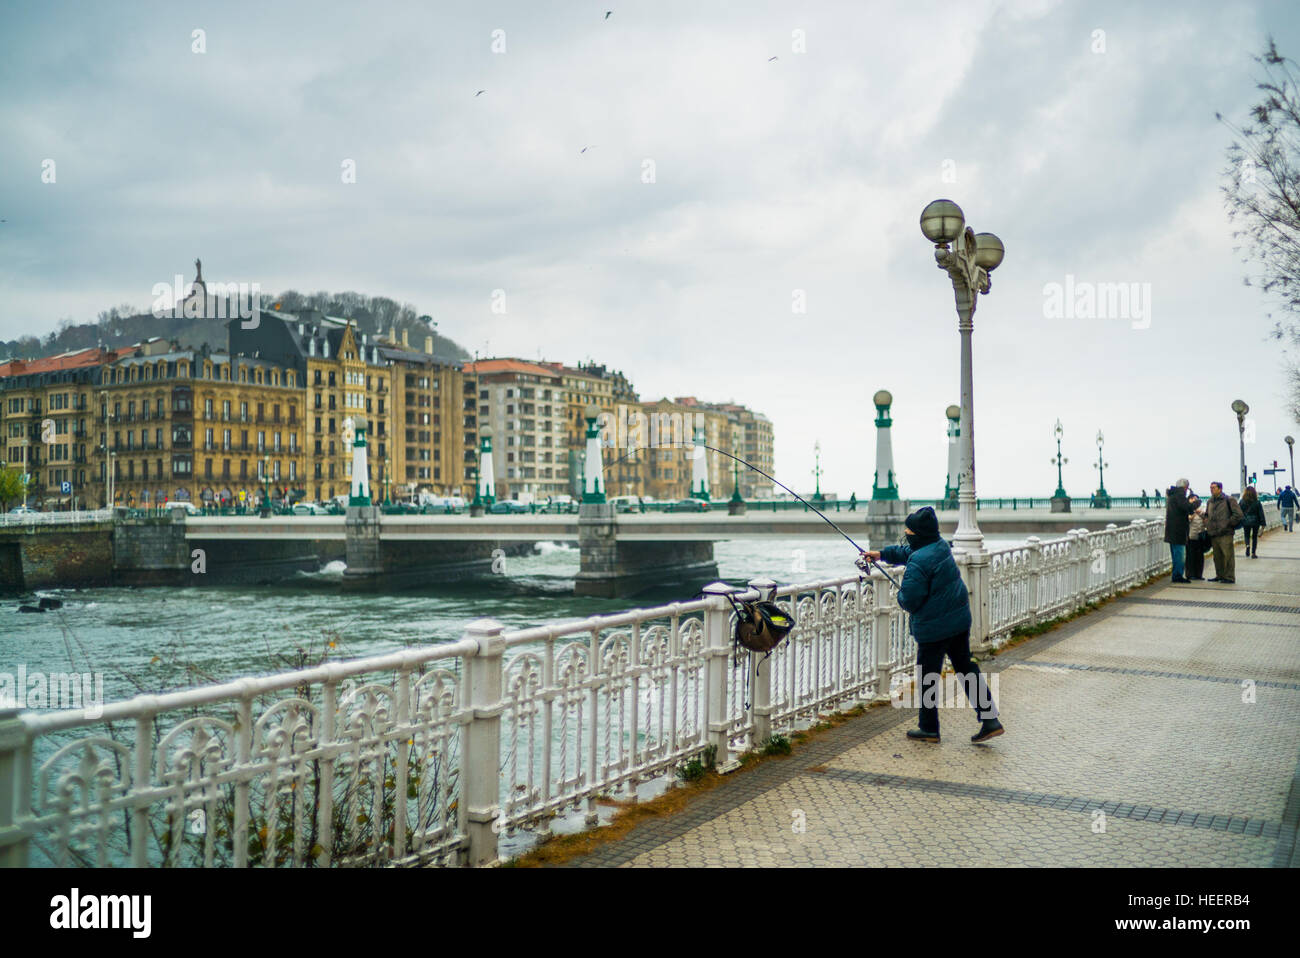 A woman fishes from the boardwalk on a cold winters day in San Sebastian Stock Photo